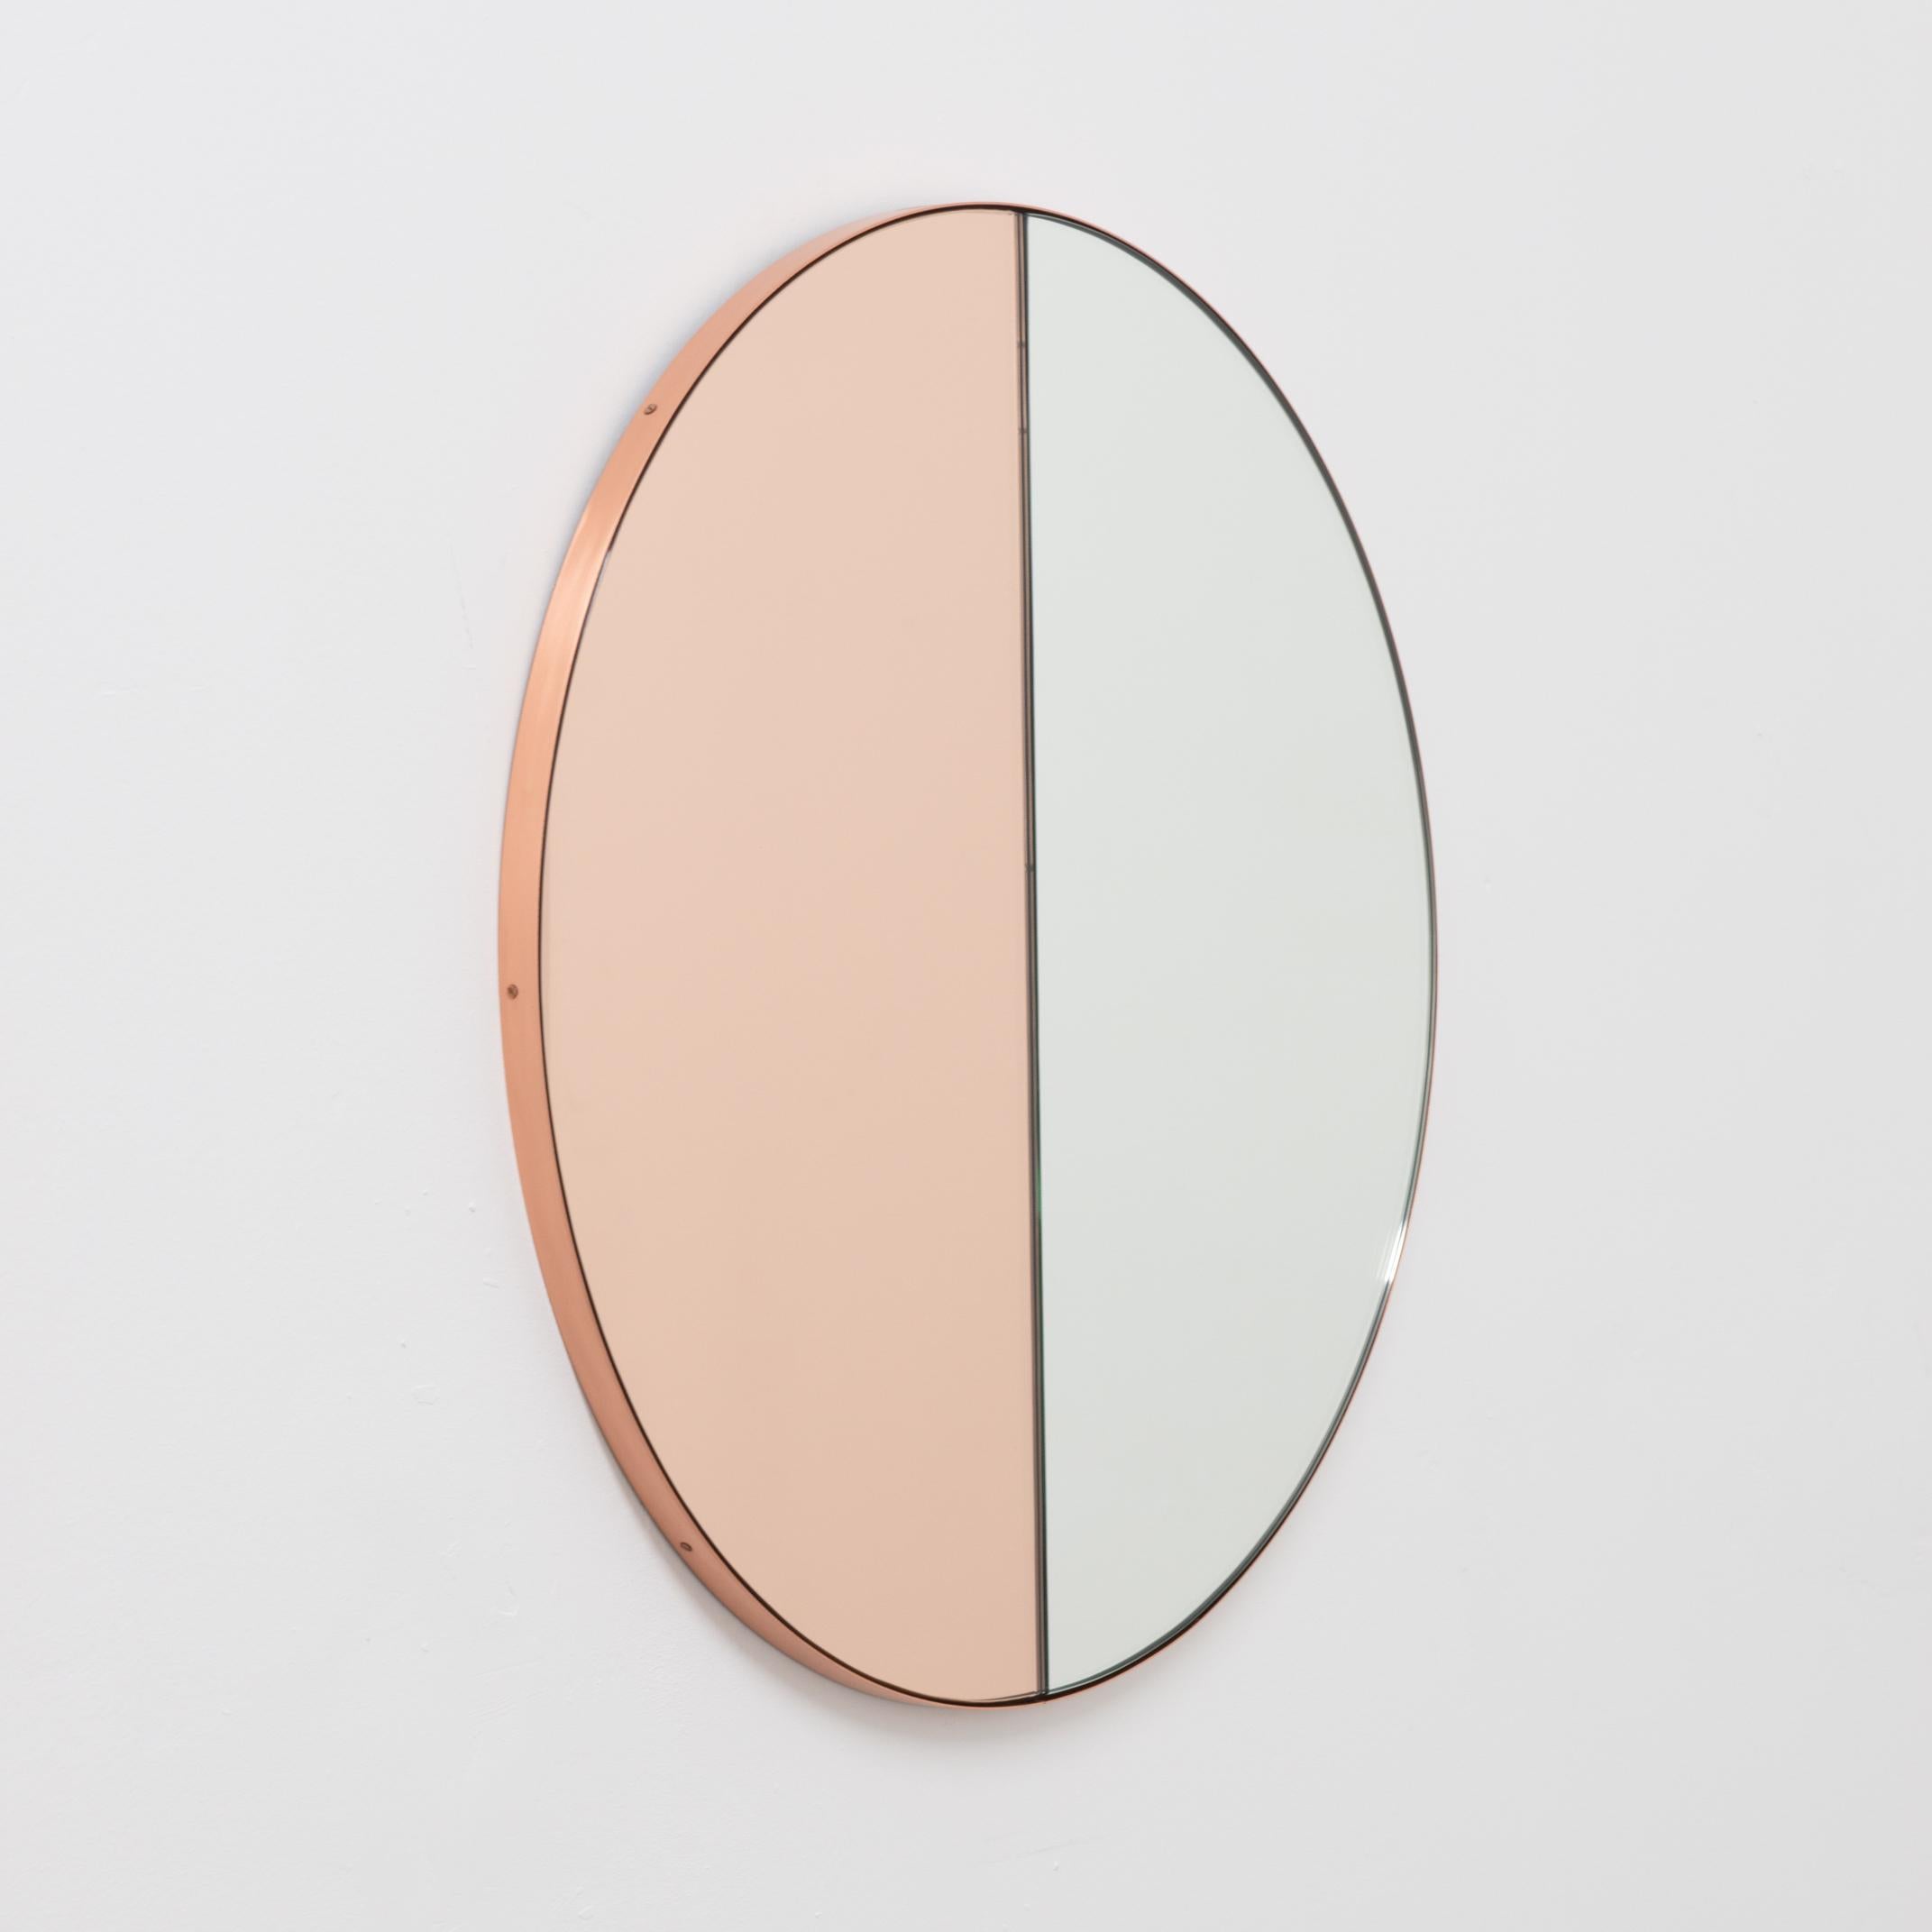 Contemporary mixed tinted (silver & rose gold / peach) Orbis Dualis™ mirror with a chic brushed copper frame. Designed and handcrafted in London, UK.

All mirrors are fitted with an ingenious French cleat (split batten) system so they may hang flush